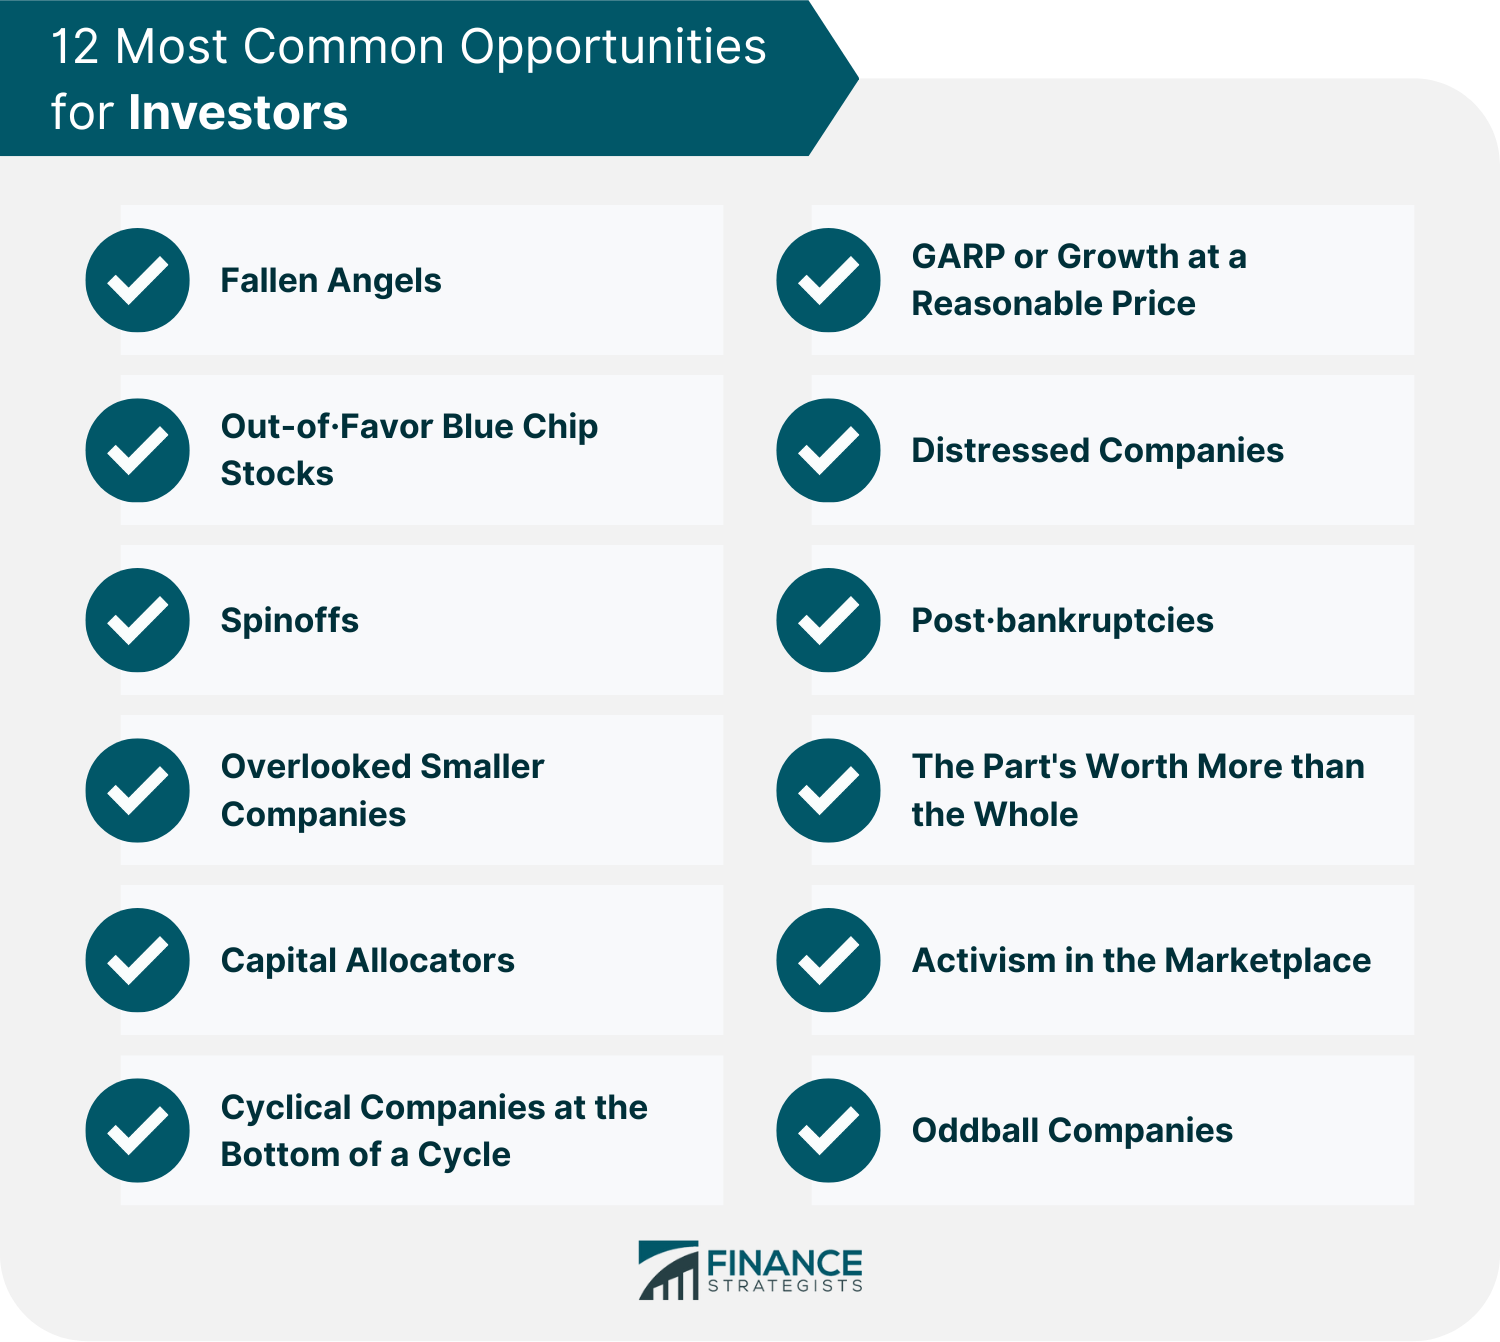 12 Most Common Opportunities for Investors